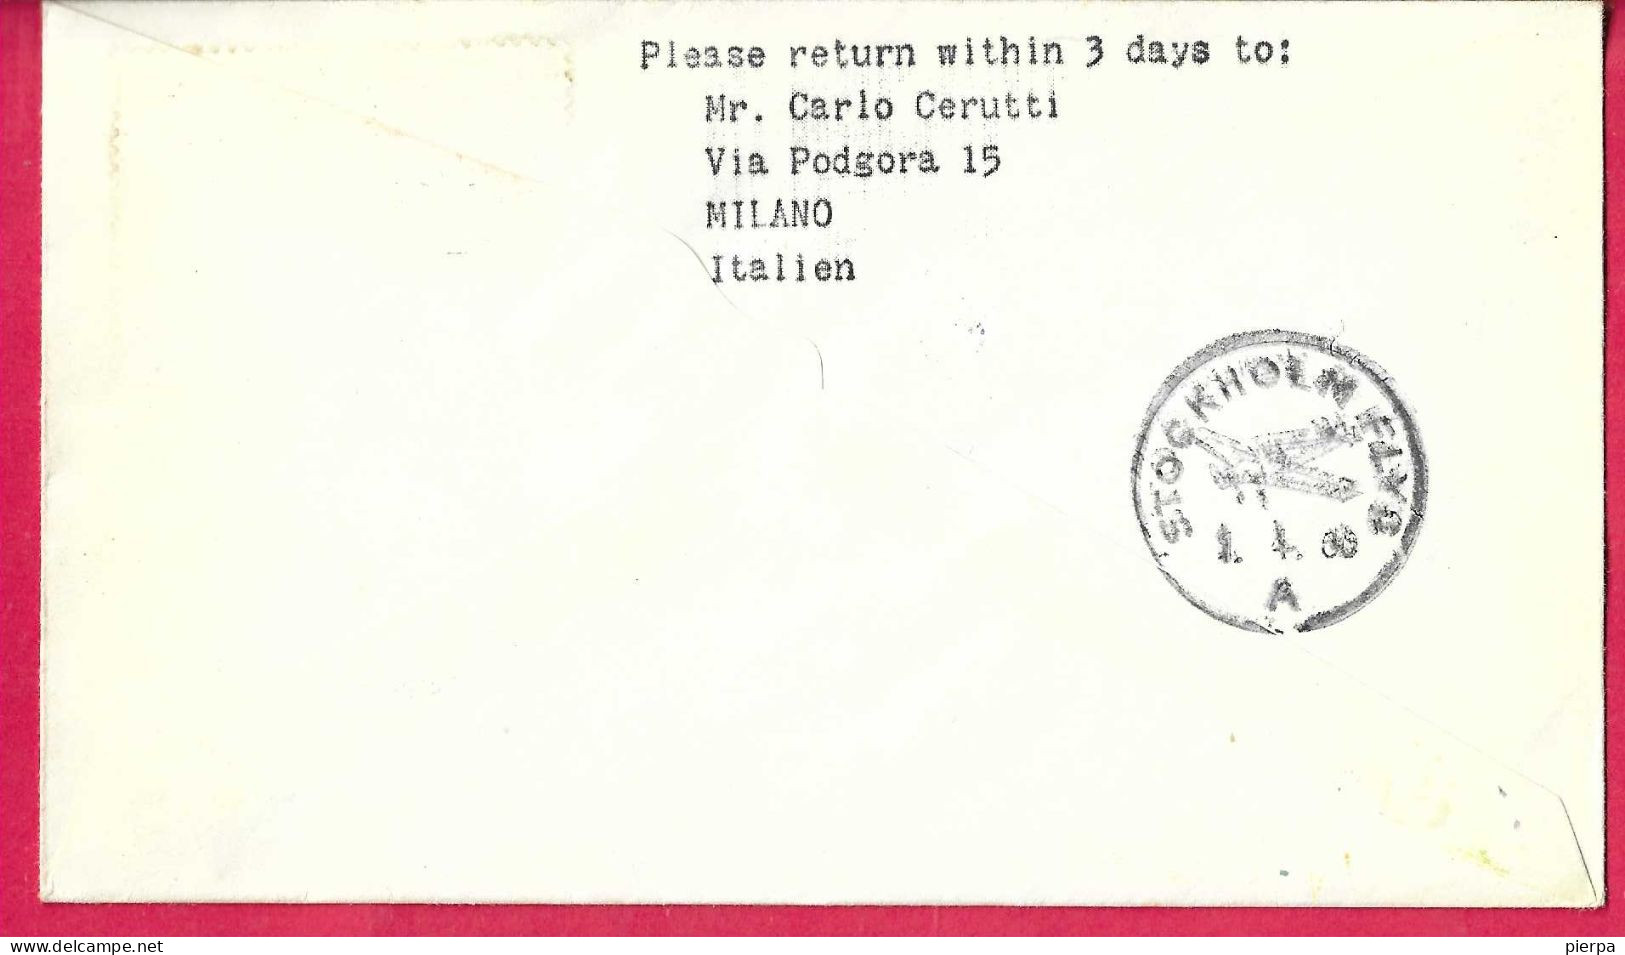 FINLAND - FIRST CARAVELLE FLIGHT FINNAIR FROM HELSINKI TO STOCKHOLM *1.4.60* ON OFFICIAL COVER - Storia Postale